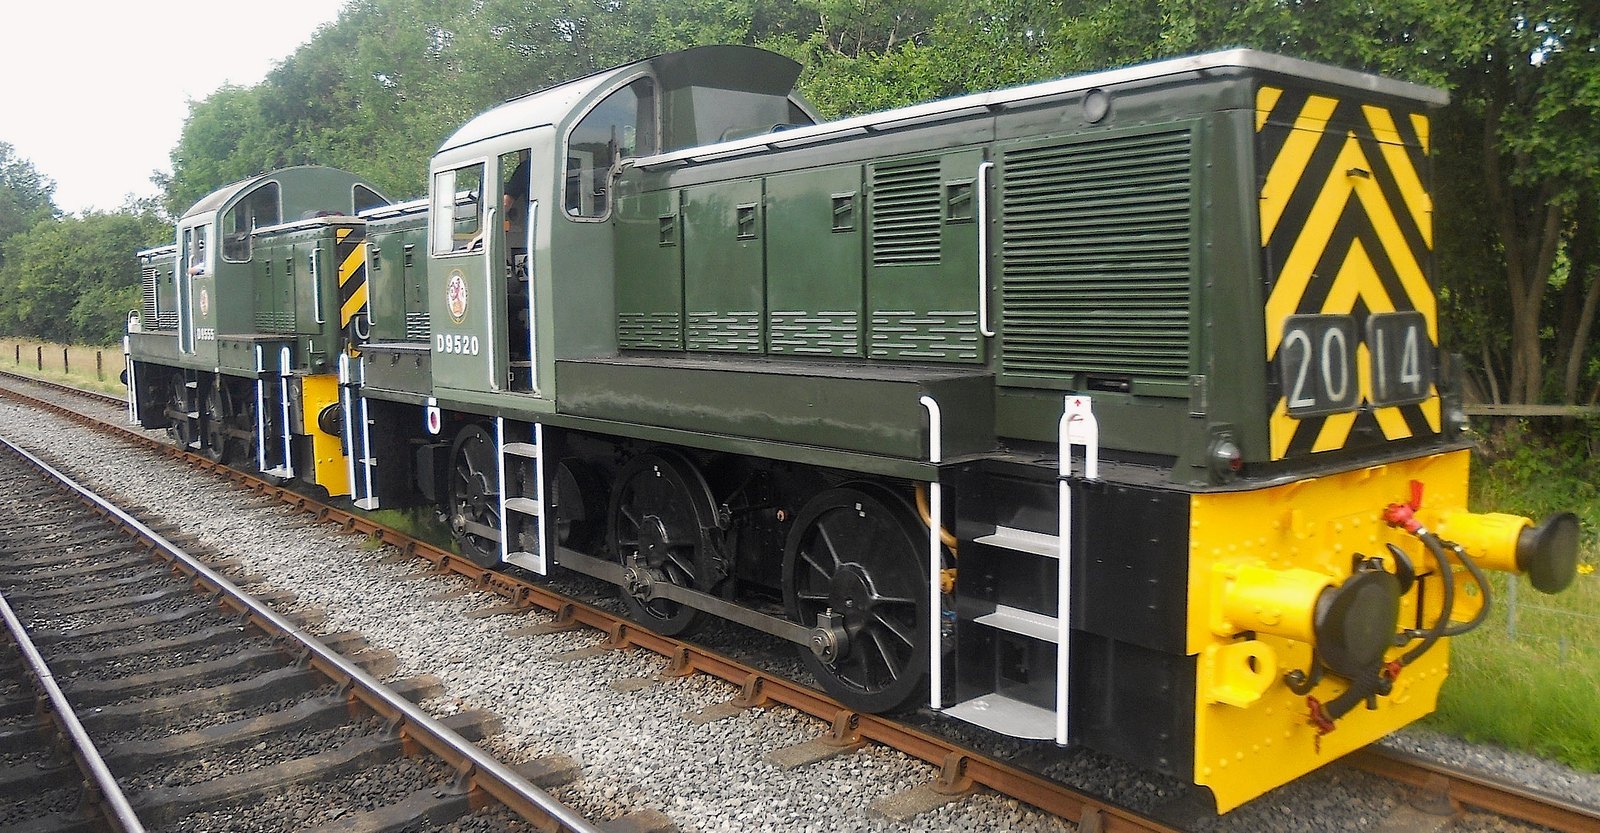 D9555 and D9520 in July 2014 at Rawtenstall